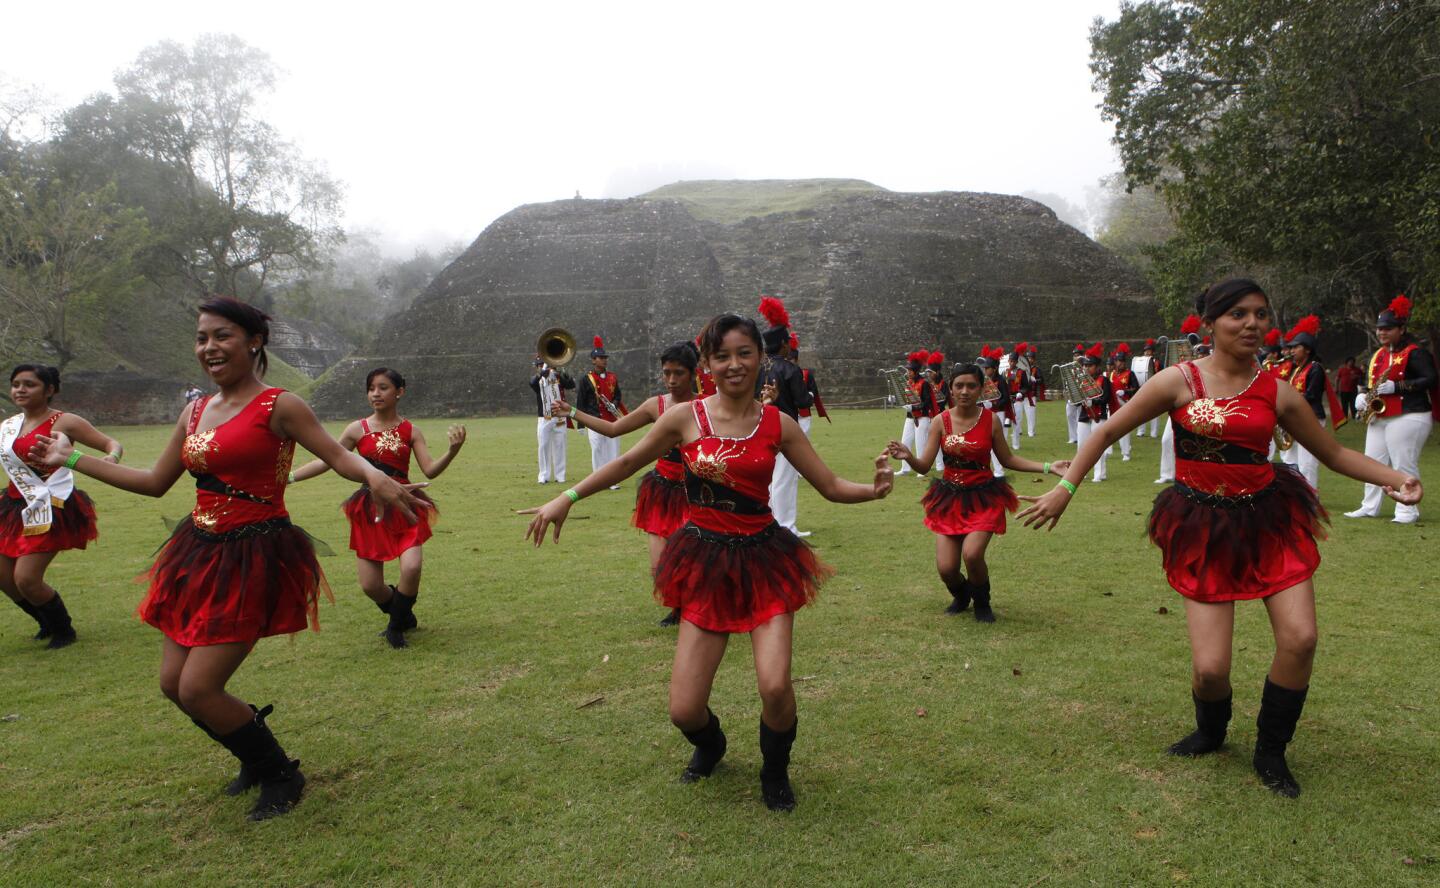 Dancers from the Succotz Festival Drum Corps practice before Britain's Prince Harry visits the Xunantunich Mayan ruin near Benke Viejo, Belize March 3, 2012.